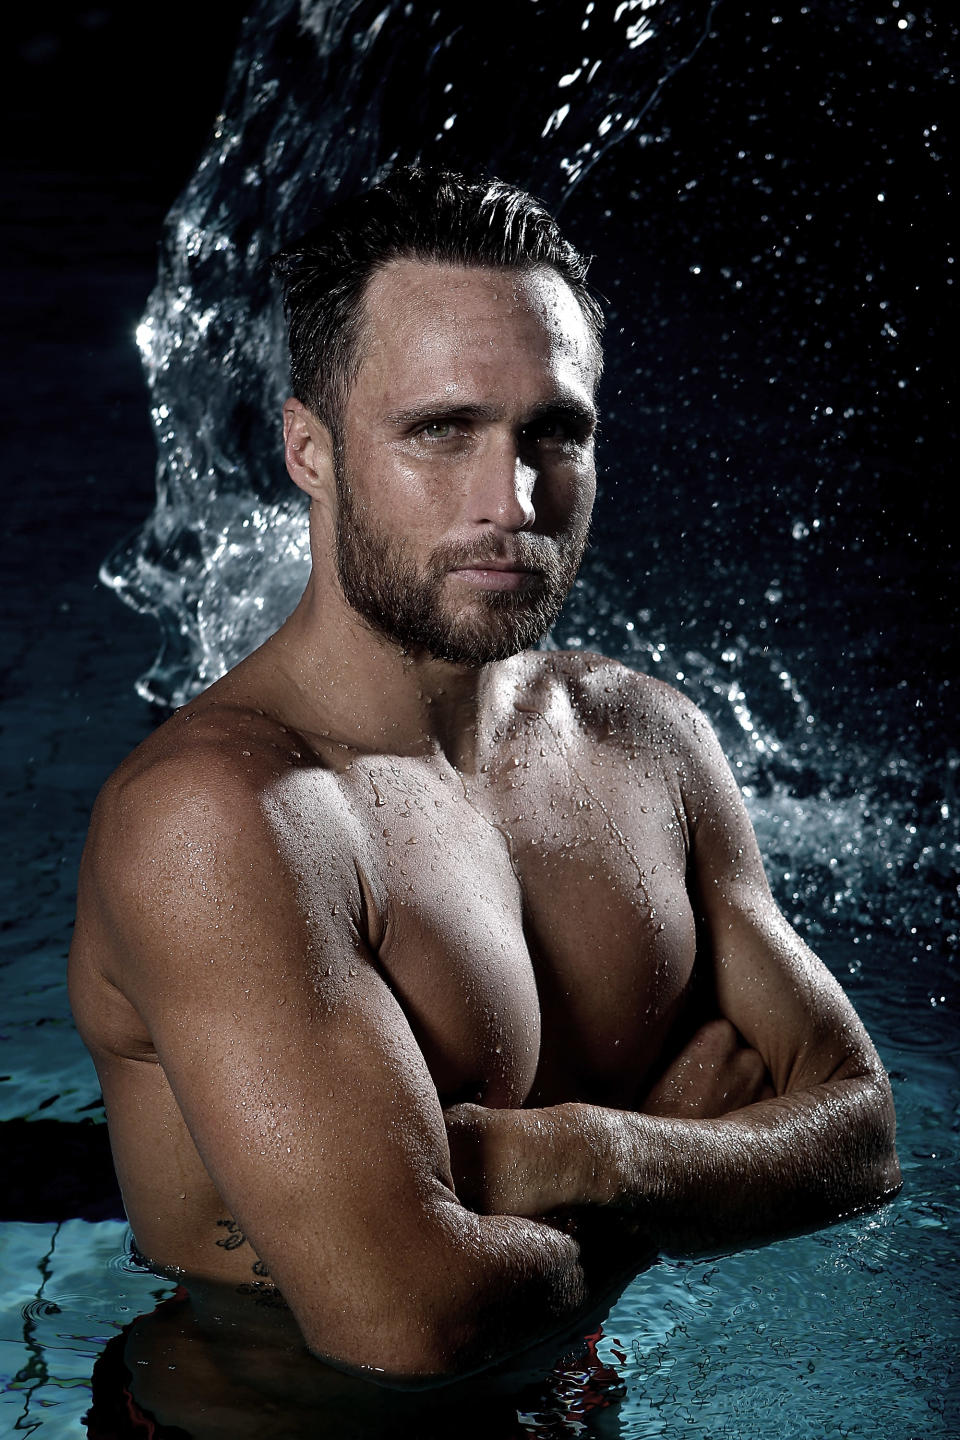 GOLD COAST, AUSTRALIA - JULY 06: (EDITORS NOTE: Image has been desaturated) Australian Olympic Games swimmer and ironman Ky Hurst poses during a portrait session on July 6, 2012 in Gold Coast, Australia. (Photo by Chris Hyde/Getty Images)